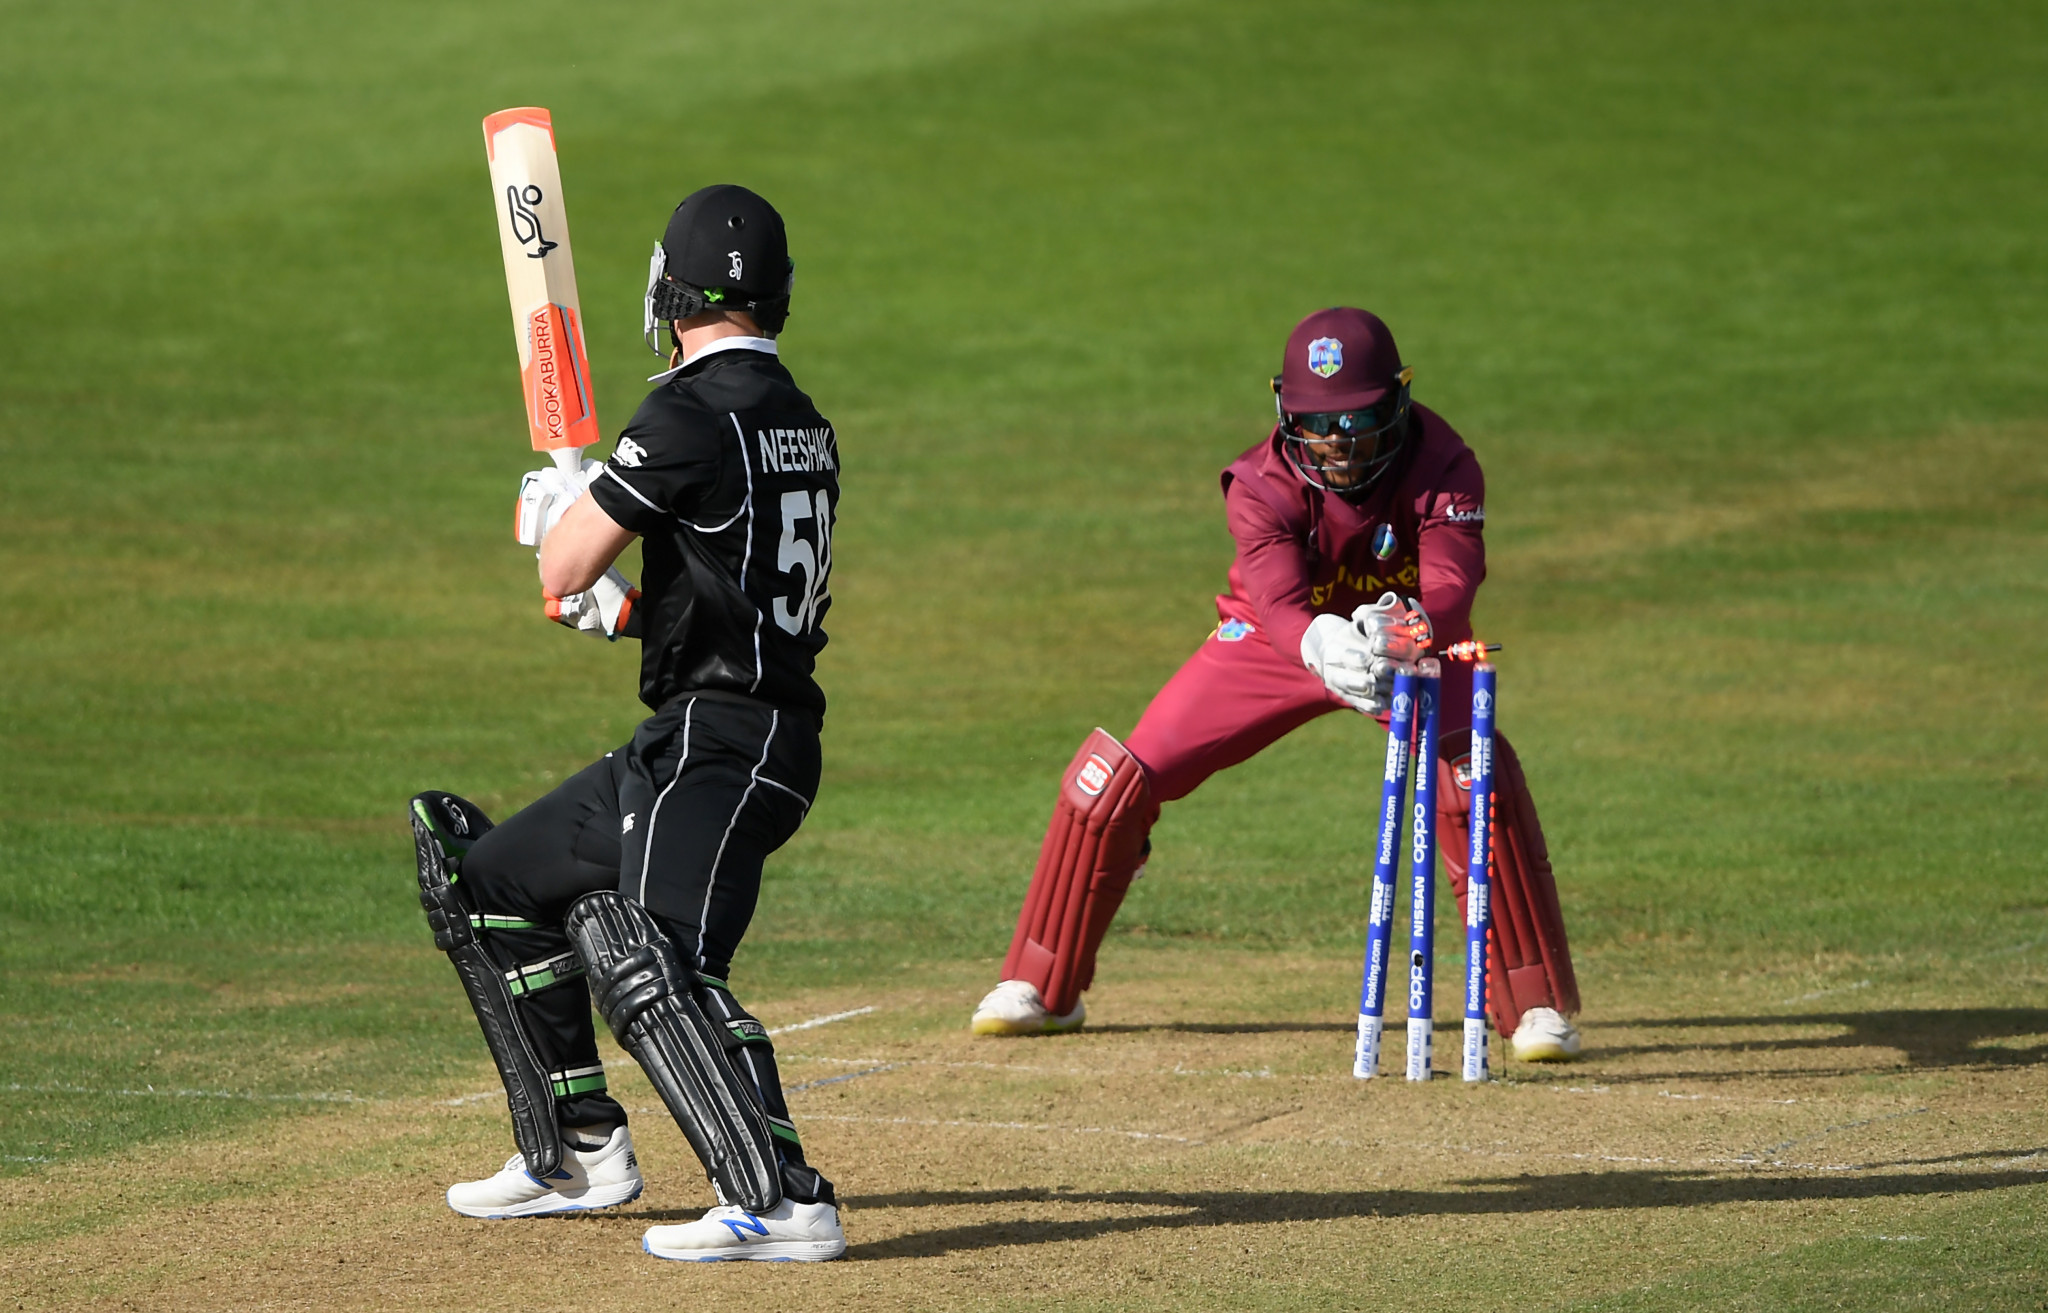 The West Indies posted over 400 in their win against New Zealand ©Getty Images